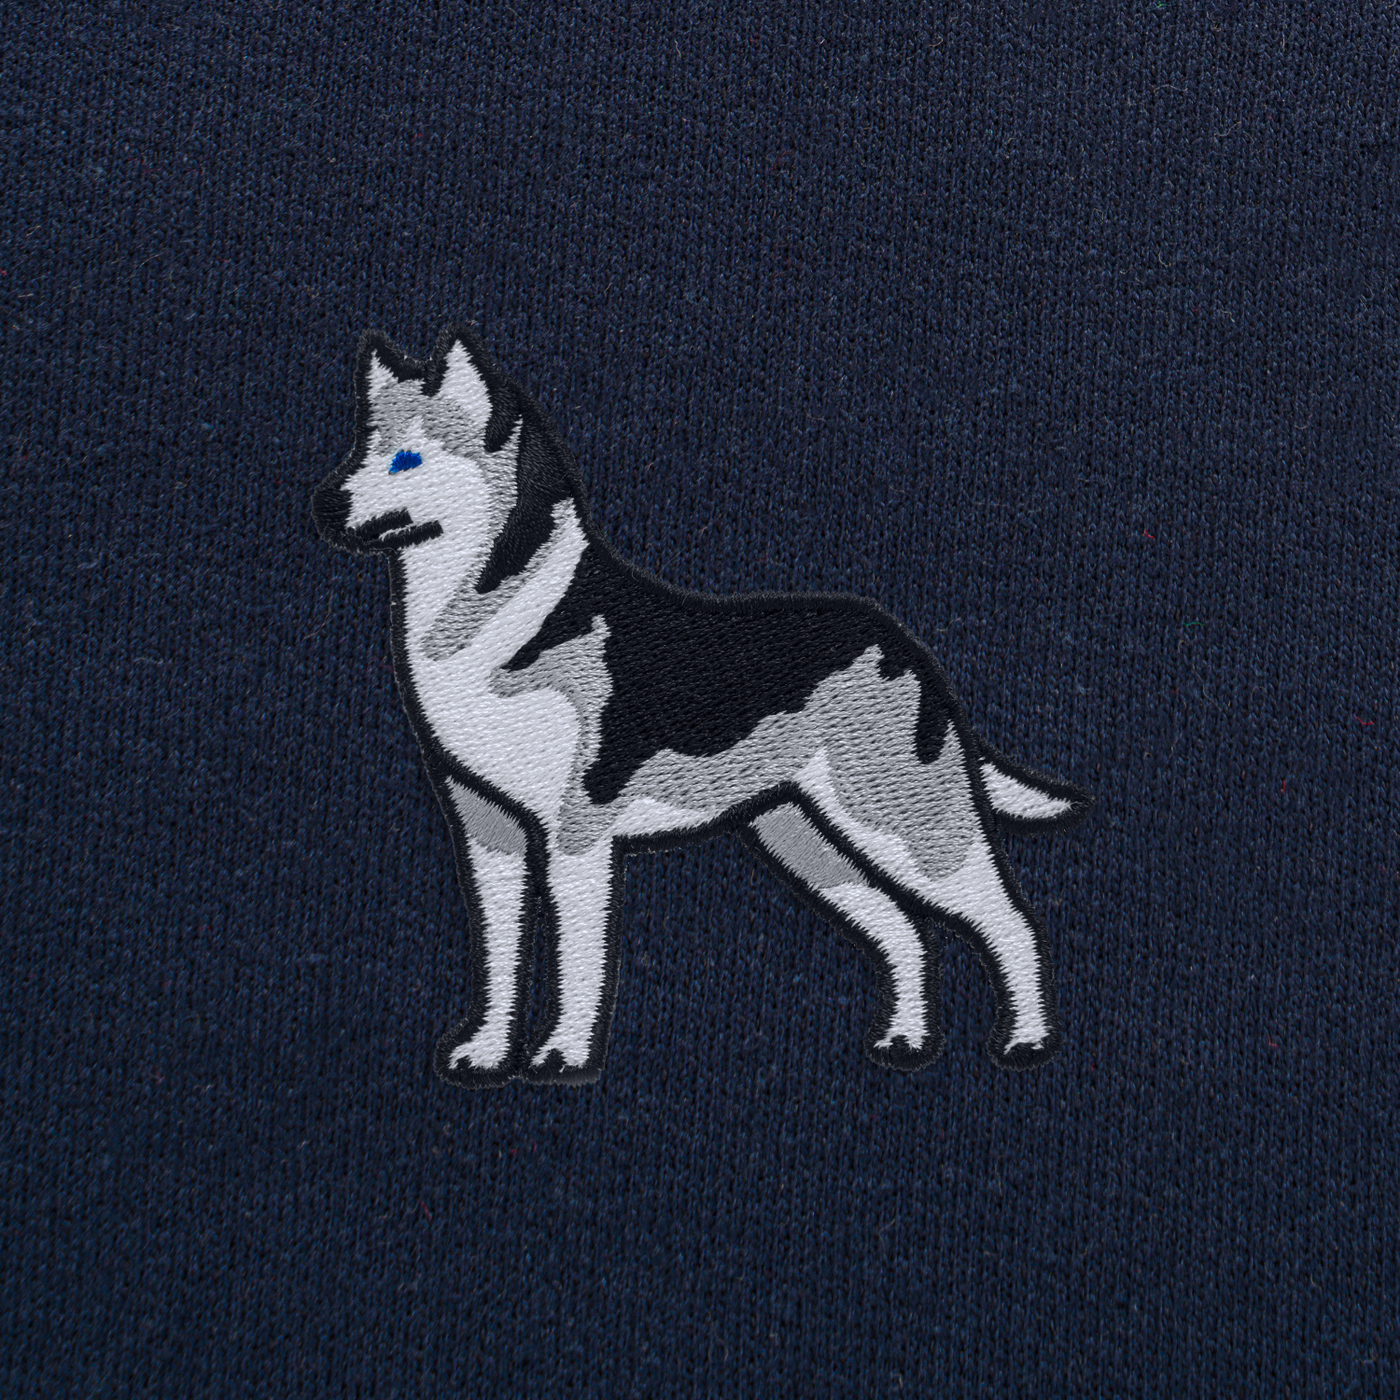 Bobby's Planet Men's Embroidered Siberian Husky Sweatshirt from Paws Dog Cat Animals Collection in Navy Color#color_navy